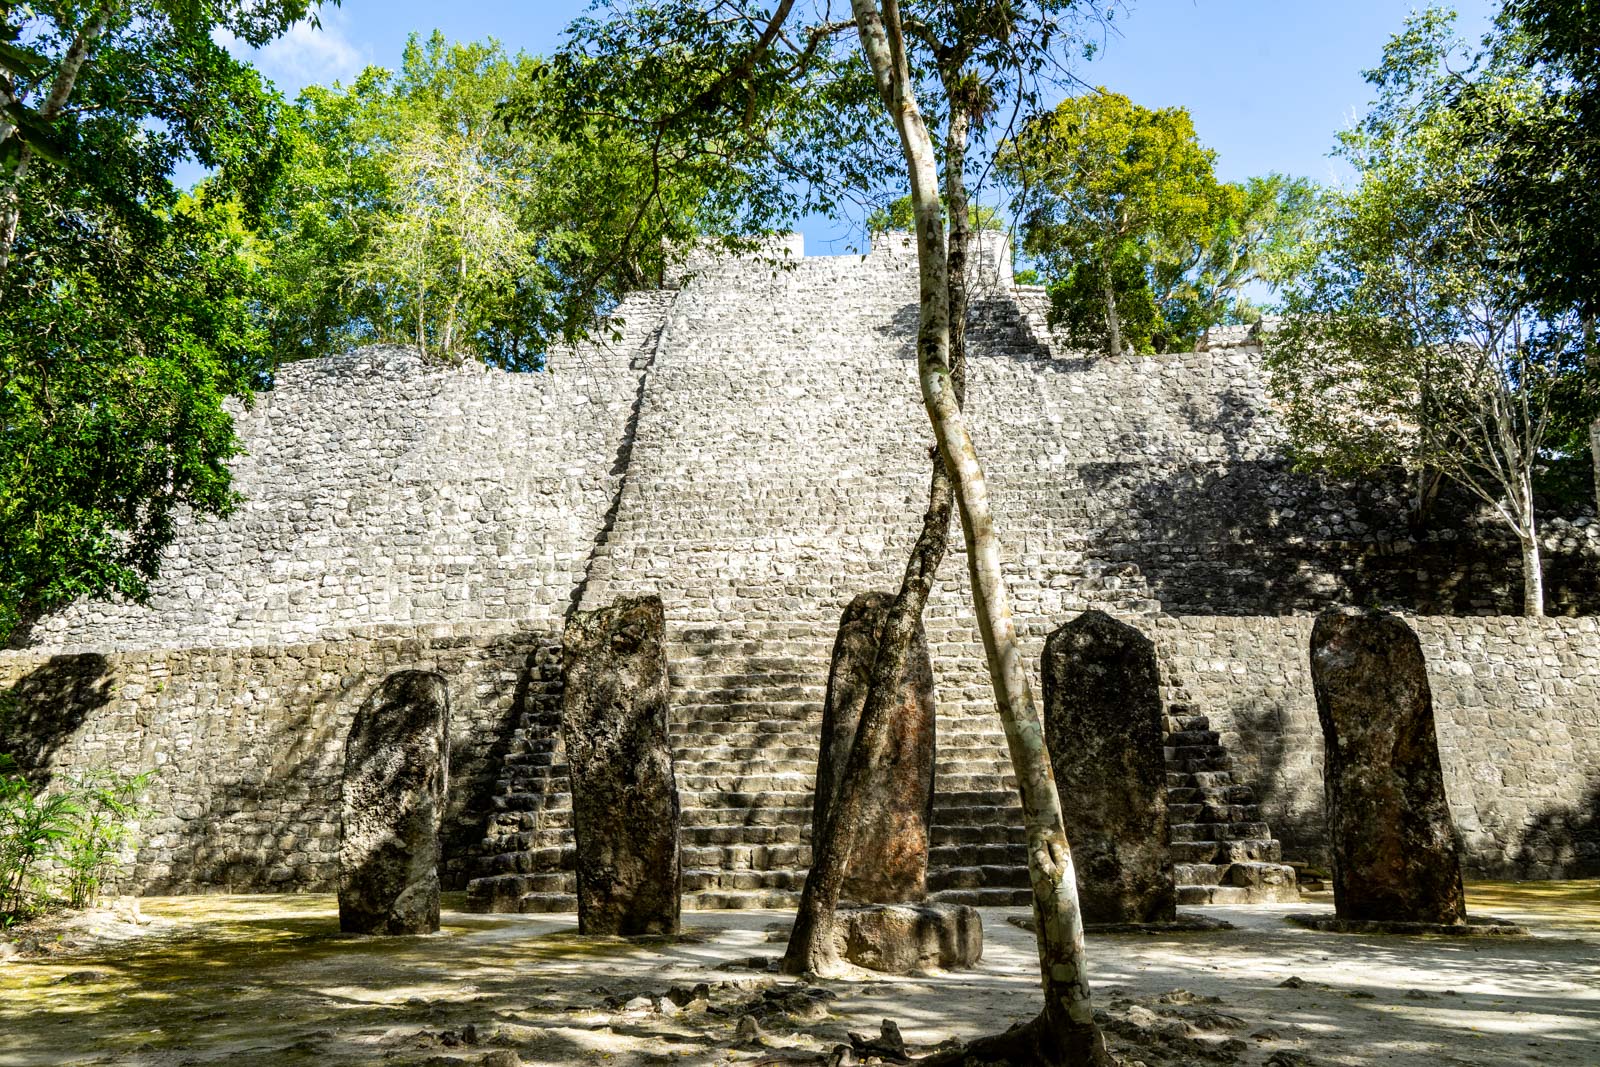 Visiting the Mayan ruins of Calakmul in Campeche, Mexico